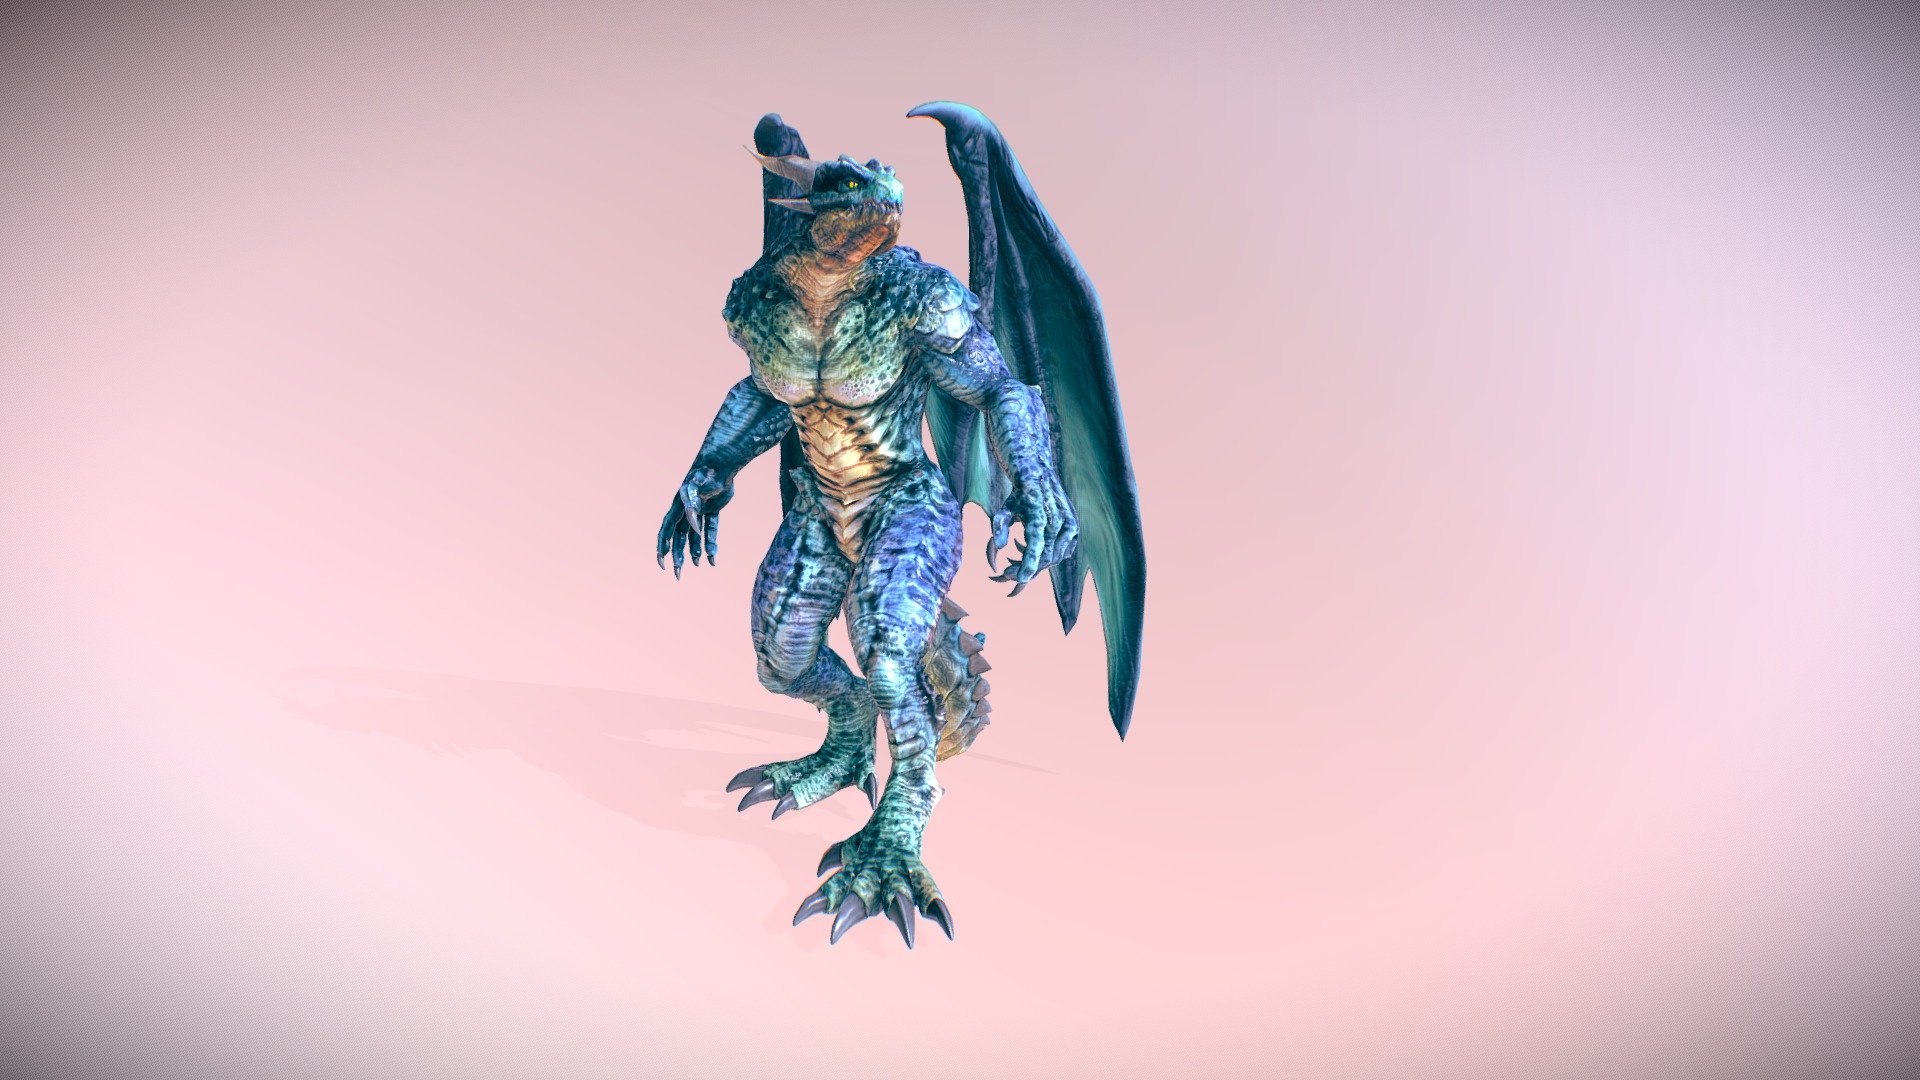 Preview of the First set of  Animations Collection of our new humanoid Dragon. (170 animations)
https://www.youtube.com/watch?v=L_ynncYmg-8
https://www.youtube.com/watch?v=yxmxPaUV6pY

Write me direclty malbers.shark87@gmail.com 
with your invoice number if you need the Unreal and Unity Projects - Drake the Dragonkin - Buy Royalty Free 3D model by Malbers Animations (@malbers.shark87) 3d model